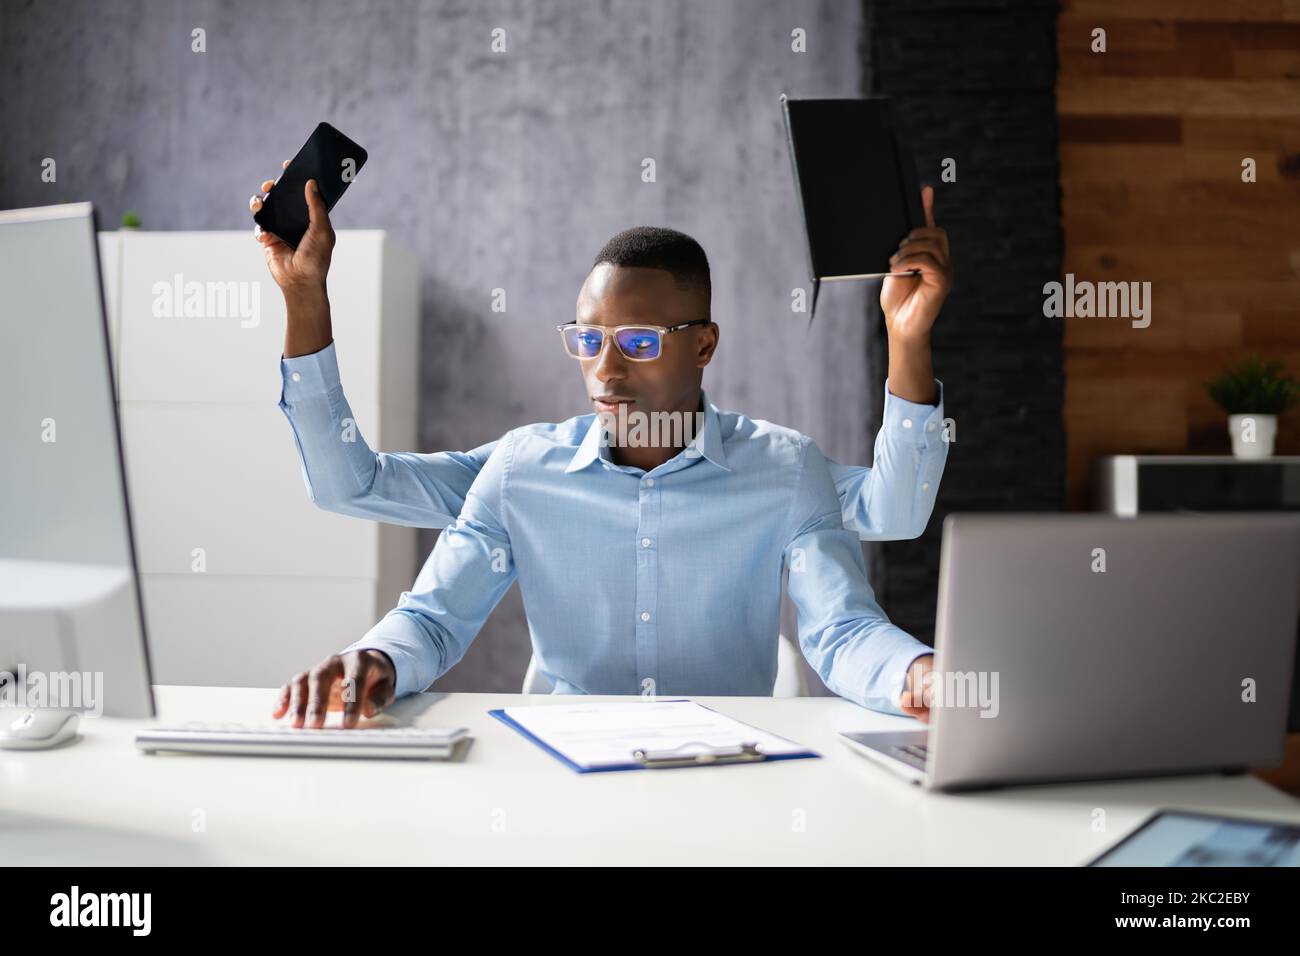 Multitasking Workload Of Happy Busy Man Worker In Office Stock Photo